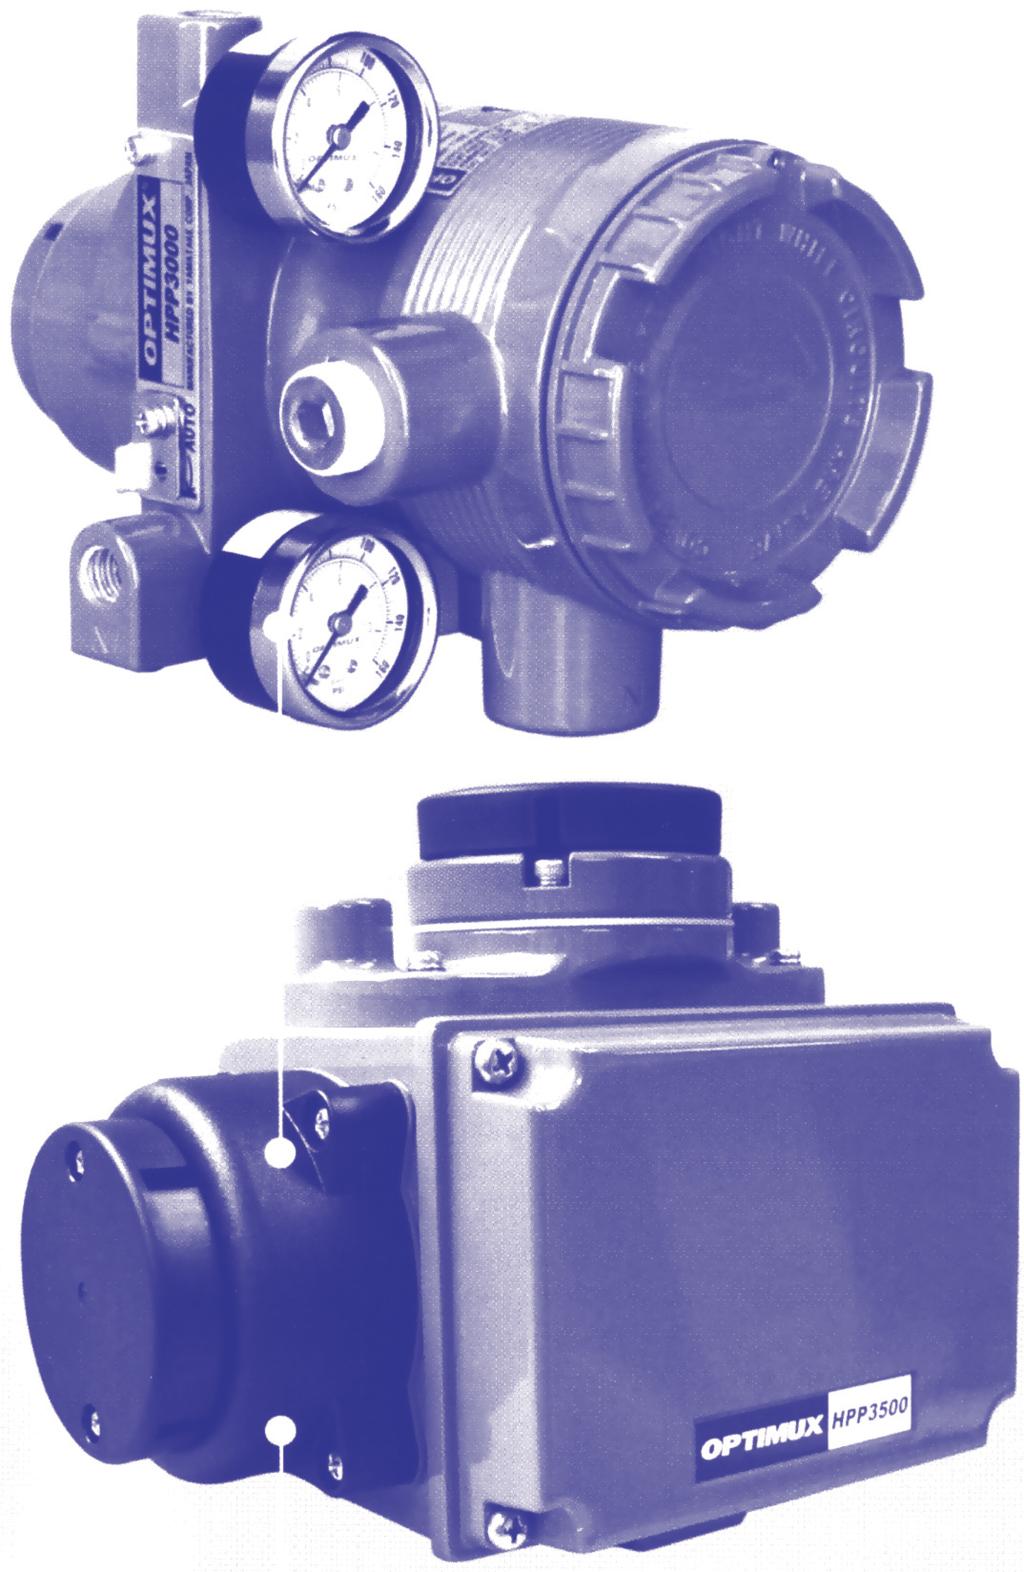 329 HPP3000/3500 HART Smart Valve Positioners The new standard when smart positioners are required with Optimux valves High accuracy and resistance to vibration improve control valve performance,